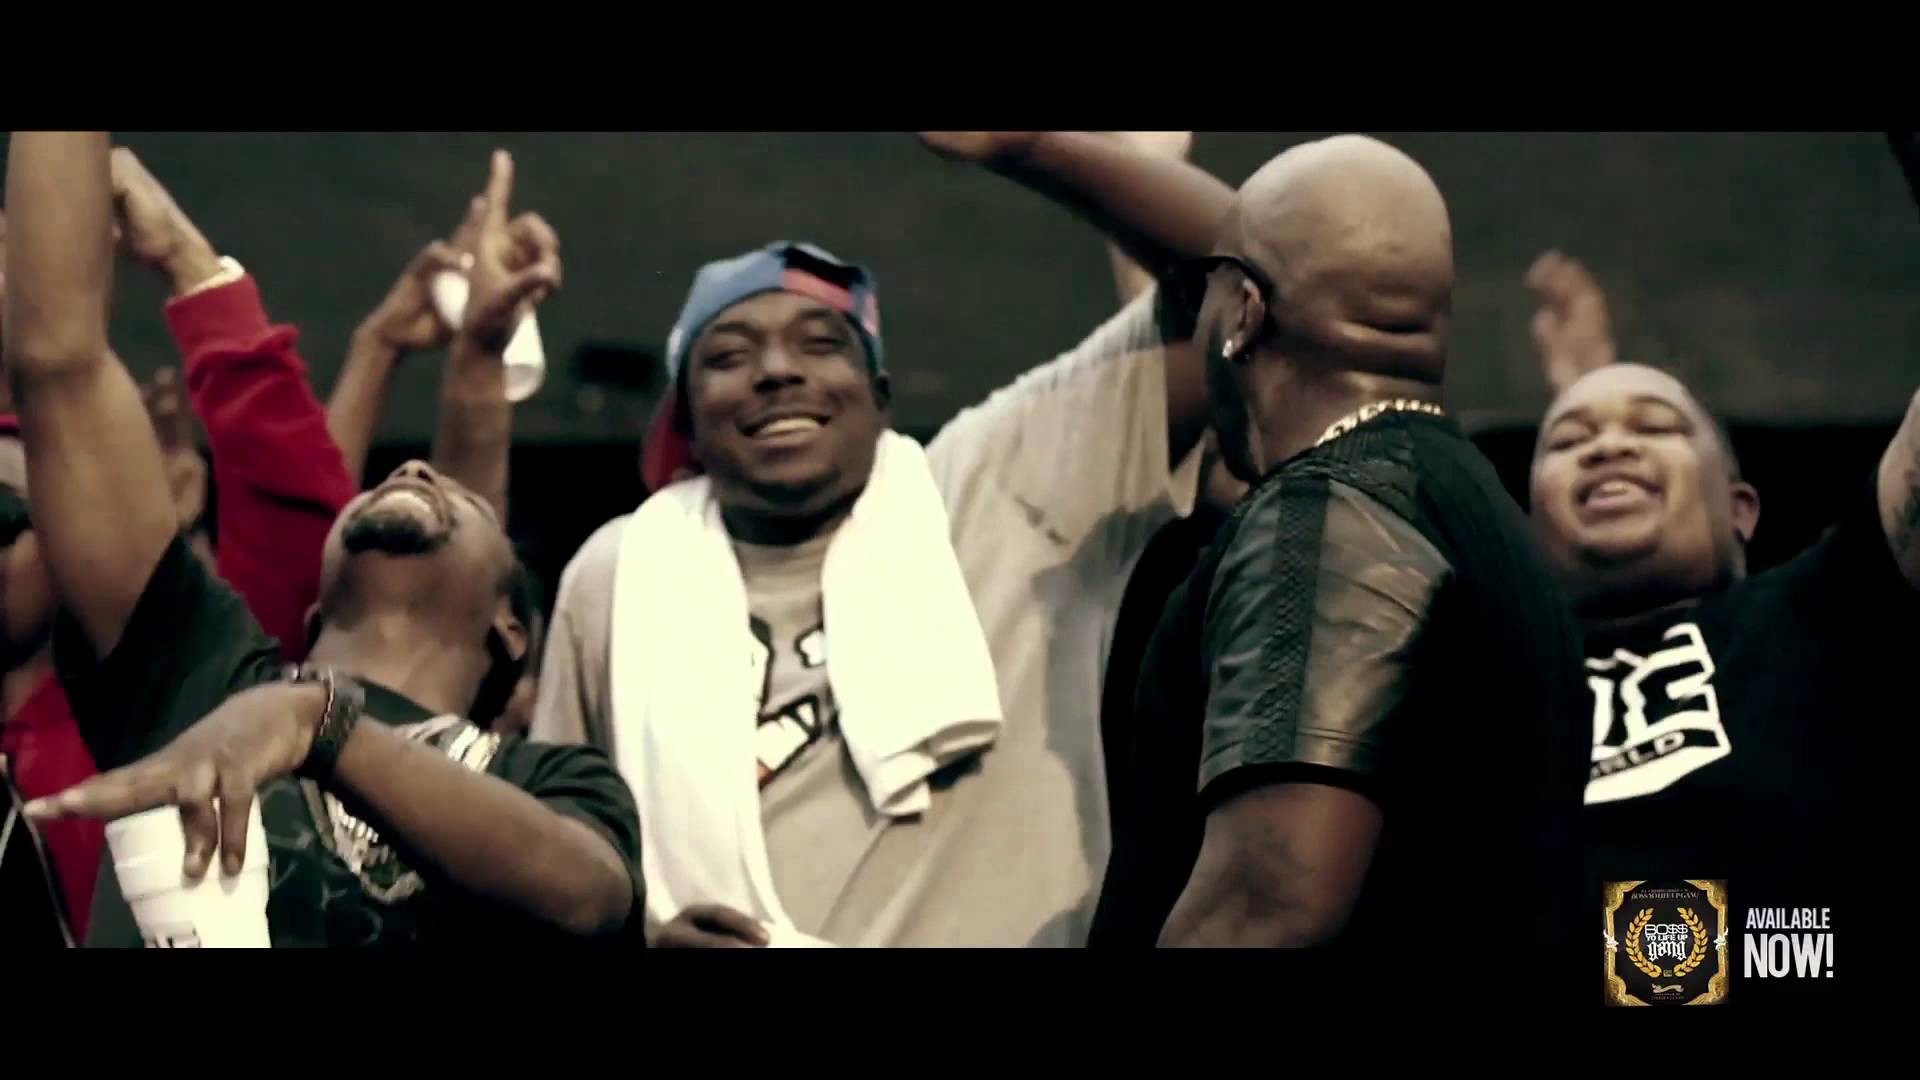 1920x1080 YG finally releases the final version of the music video for his latest  single “My Niggas” featuring Young Jeezy and Rich Homie Quan.